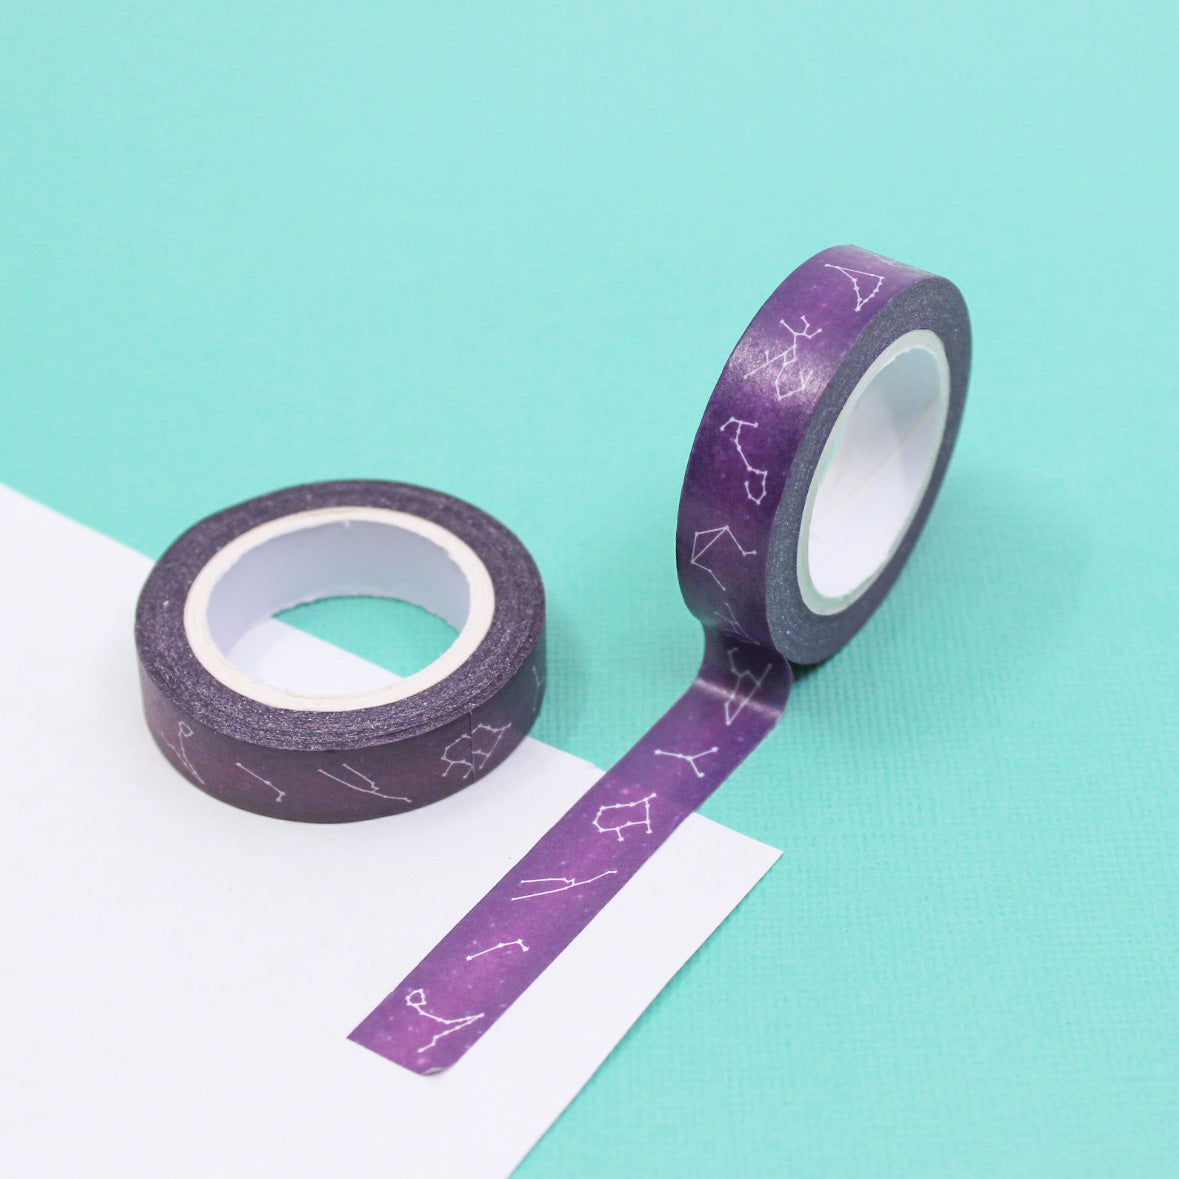 Decorate your crafts with this mystical washi tape featuring the twelve zodiac constellation symbols in a beautiful purple hue. Perfect for adding a celestial touch to your journals, scrapbooks, or planners. This tape is sold at BBB Supplies Craft Shop.